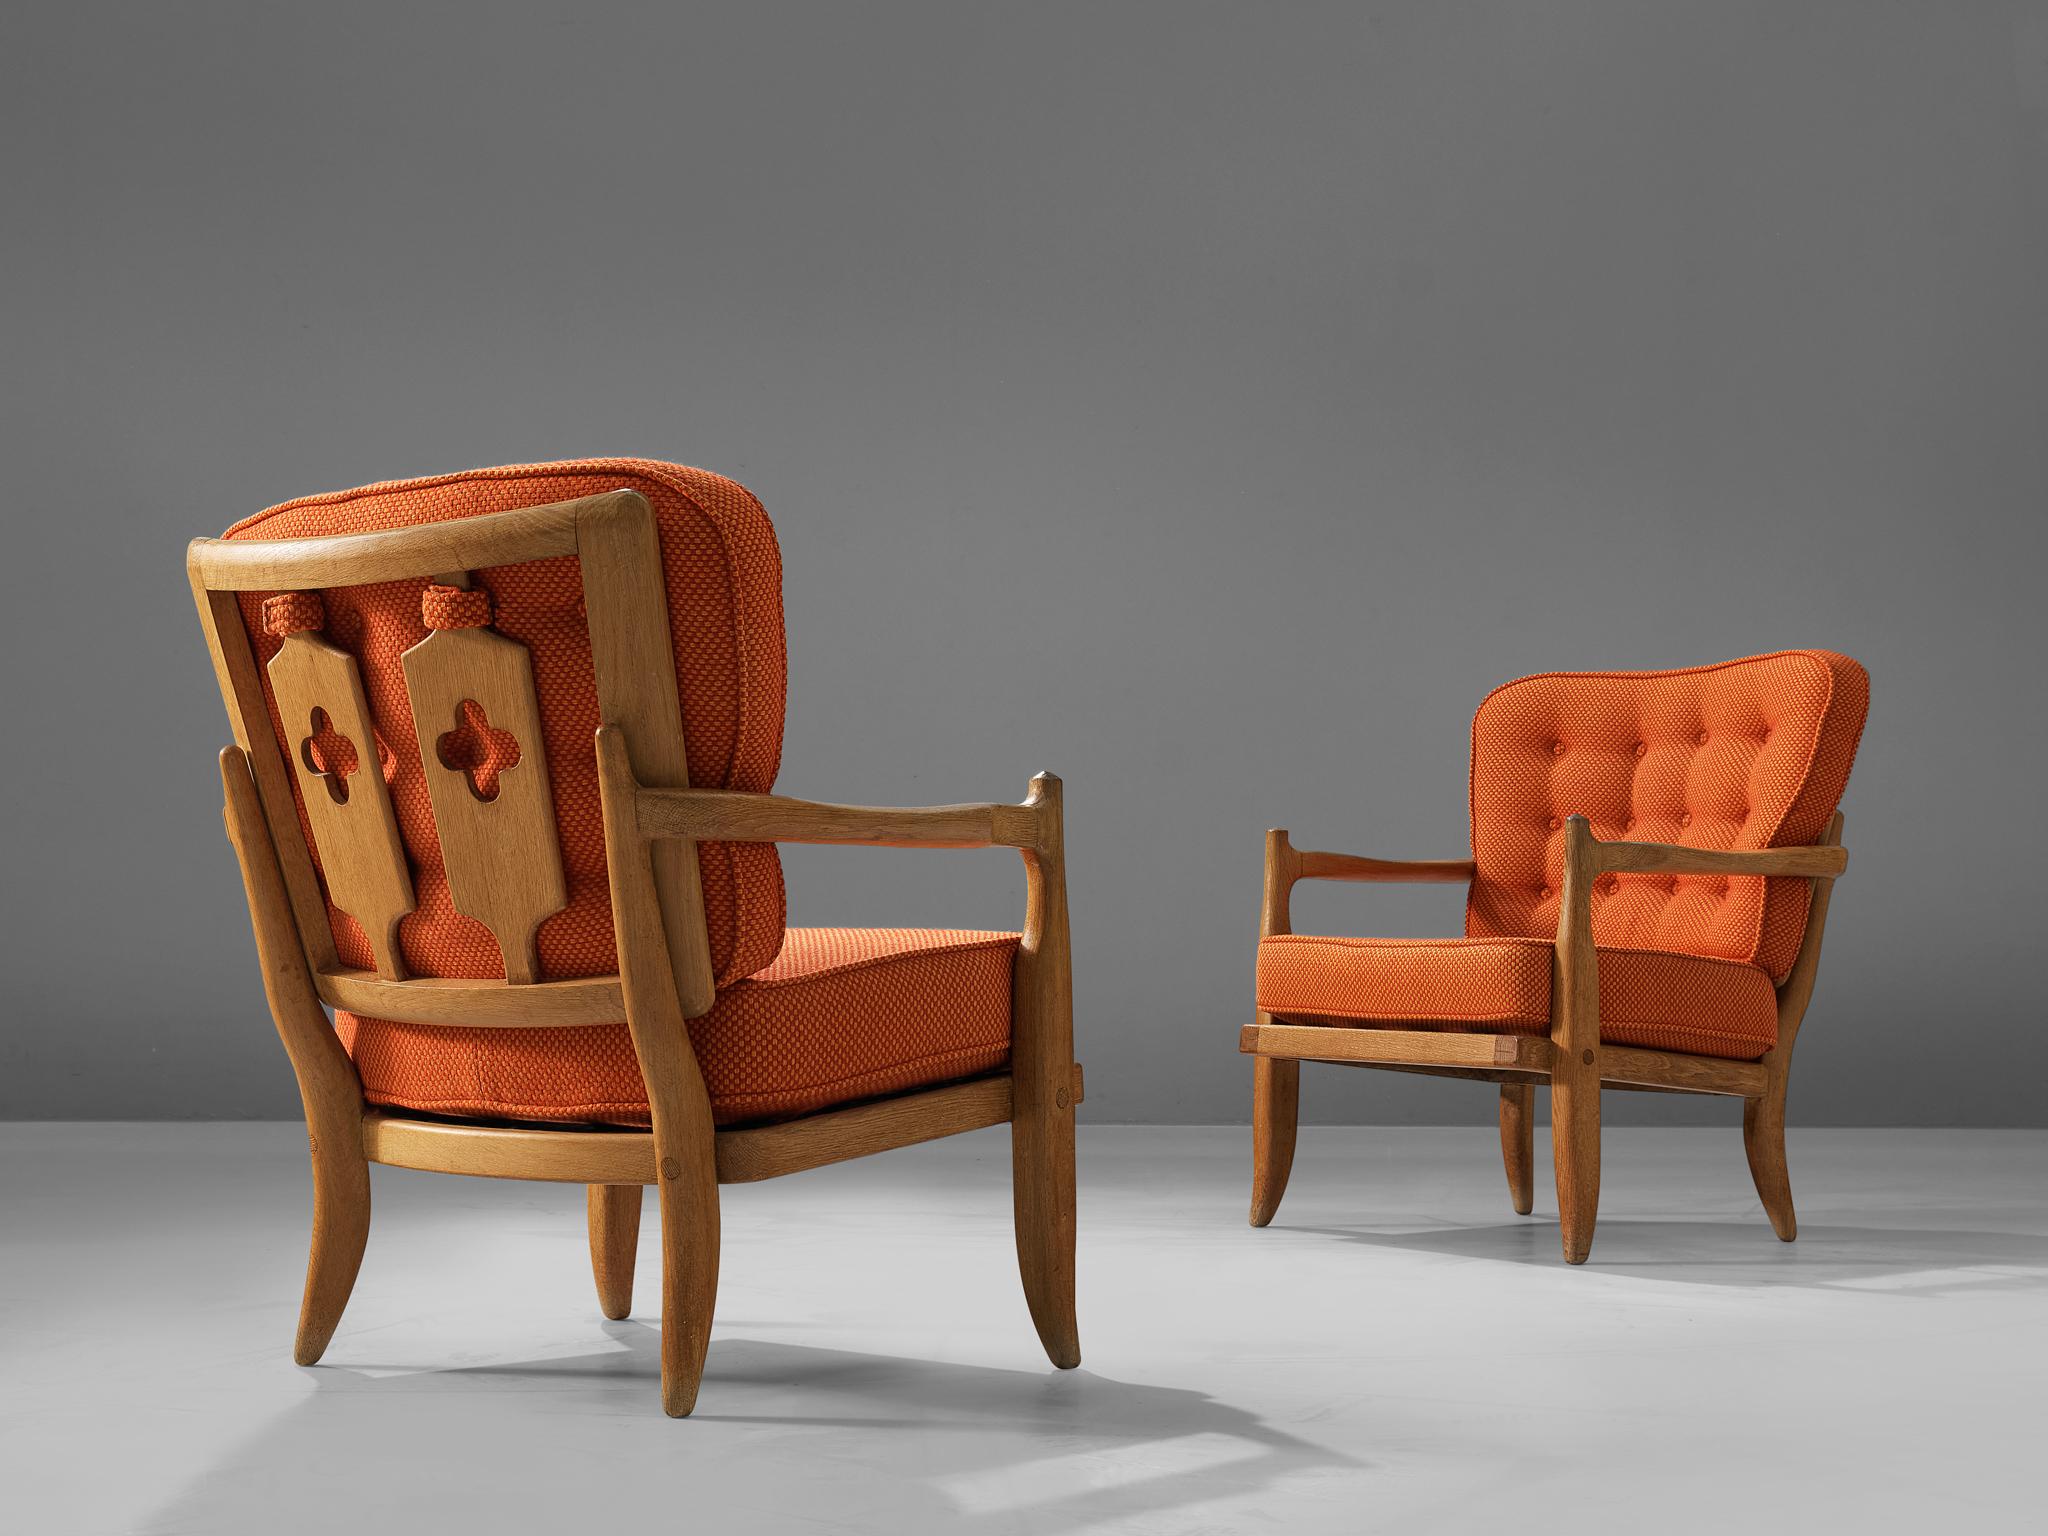 Guillerme & Chambron for Votre Maison, pair of easy chairs model ‘Jose’, oak, orange fabric, France, 1960s

Characteristic pair of armchairs by French designer duo Guillerme & Chambron. While the front convinces with its clear appearance, the